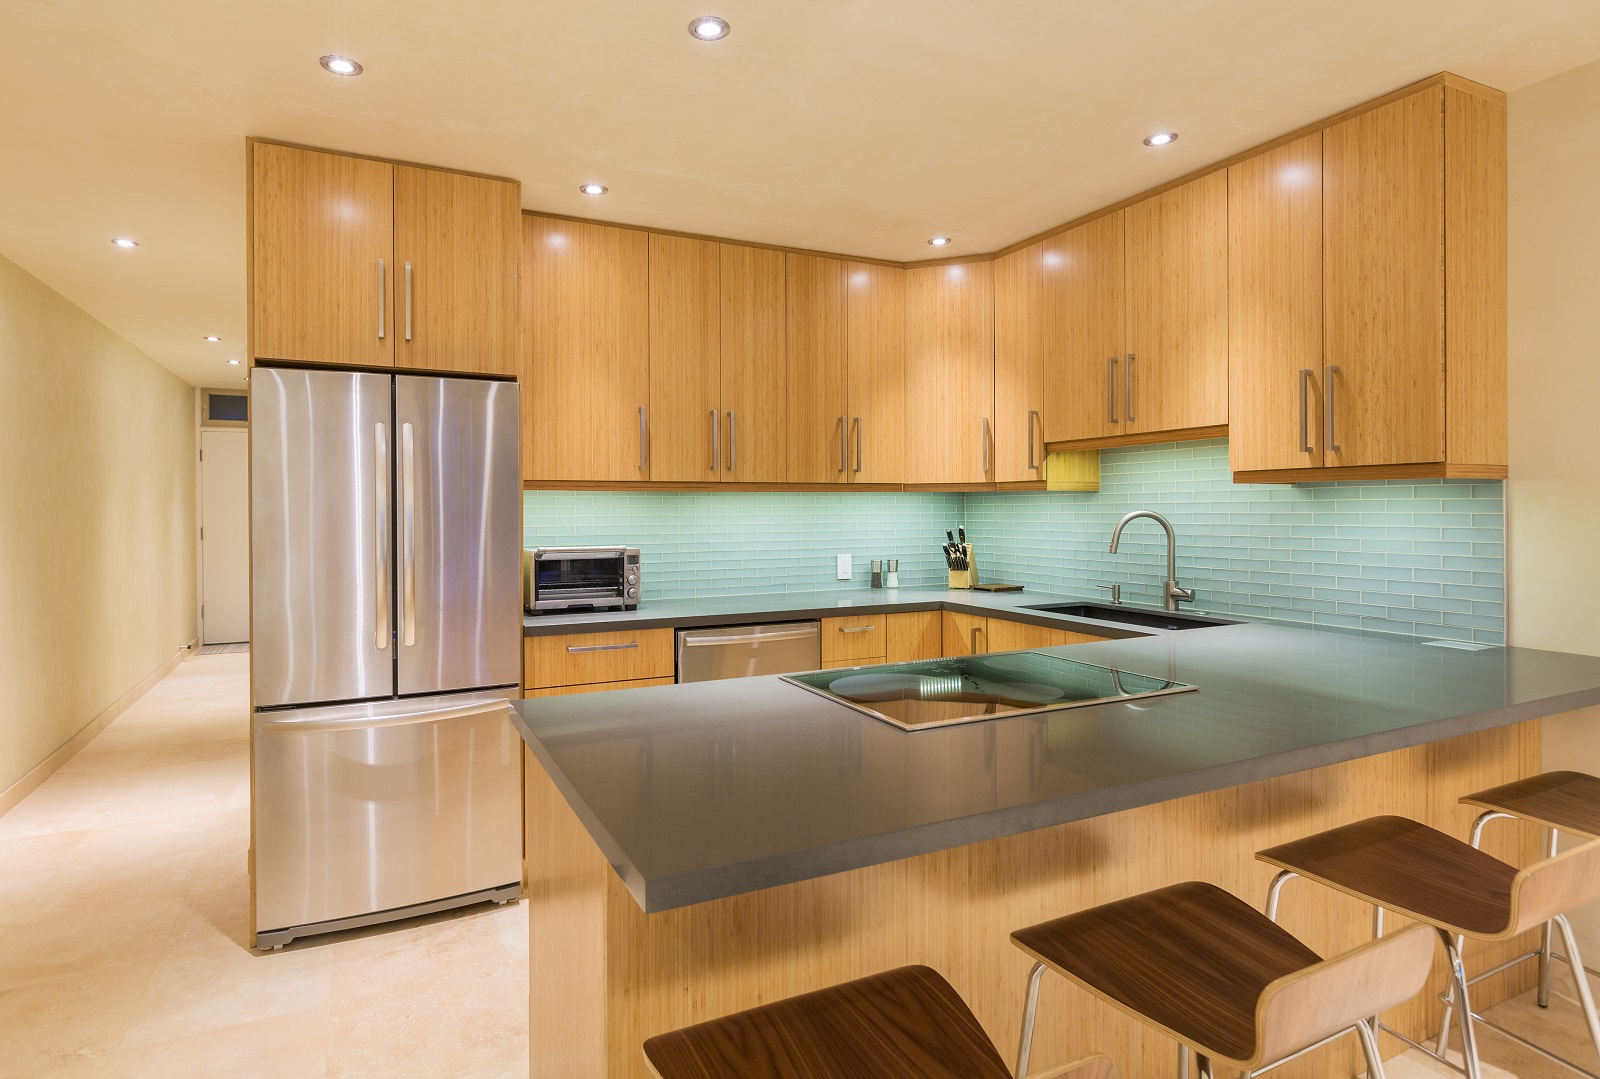 Kitchen Remodeling: What You Need To Know - Modern Painting & Remodeling